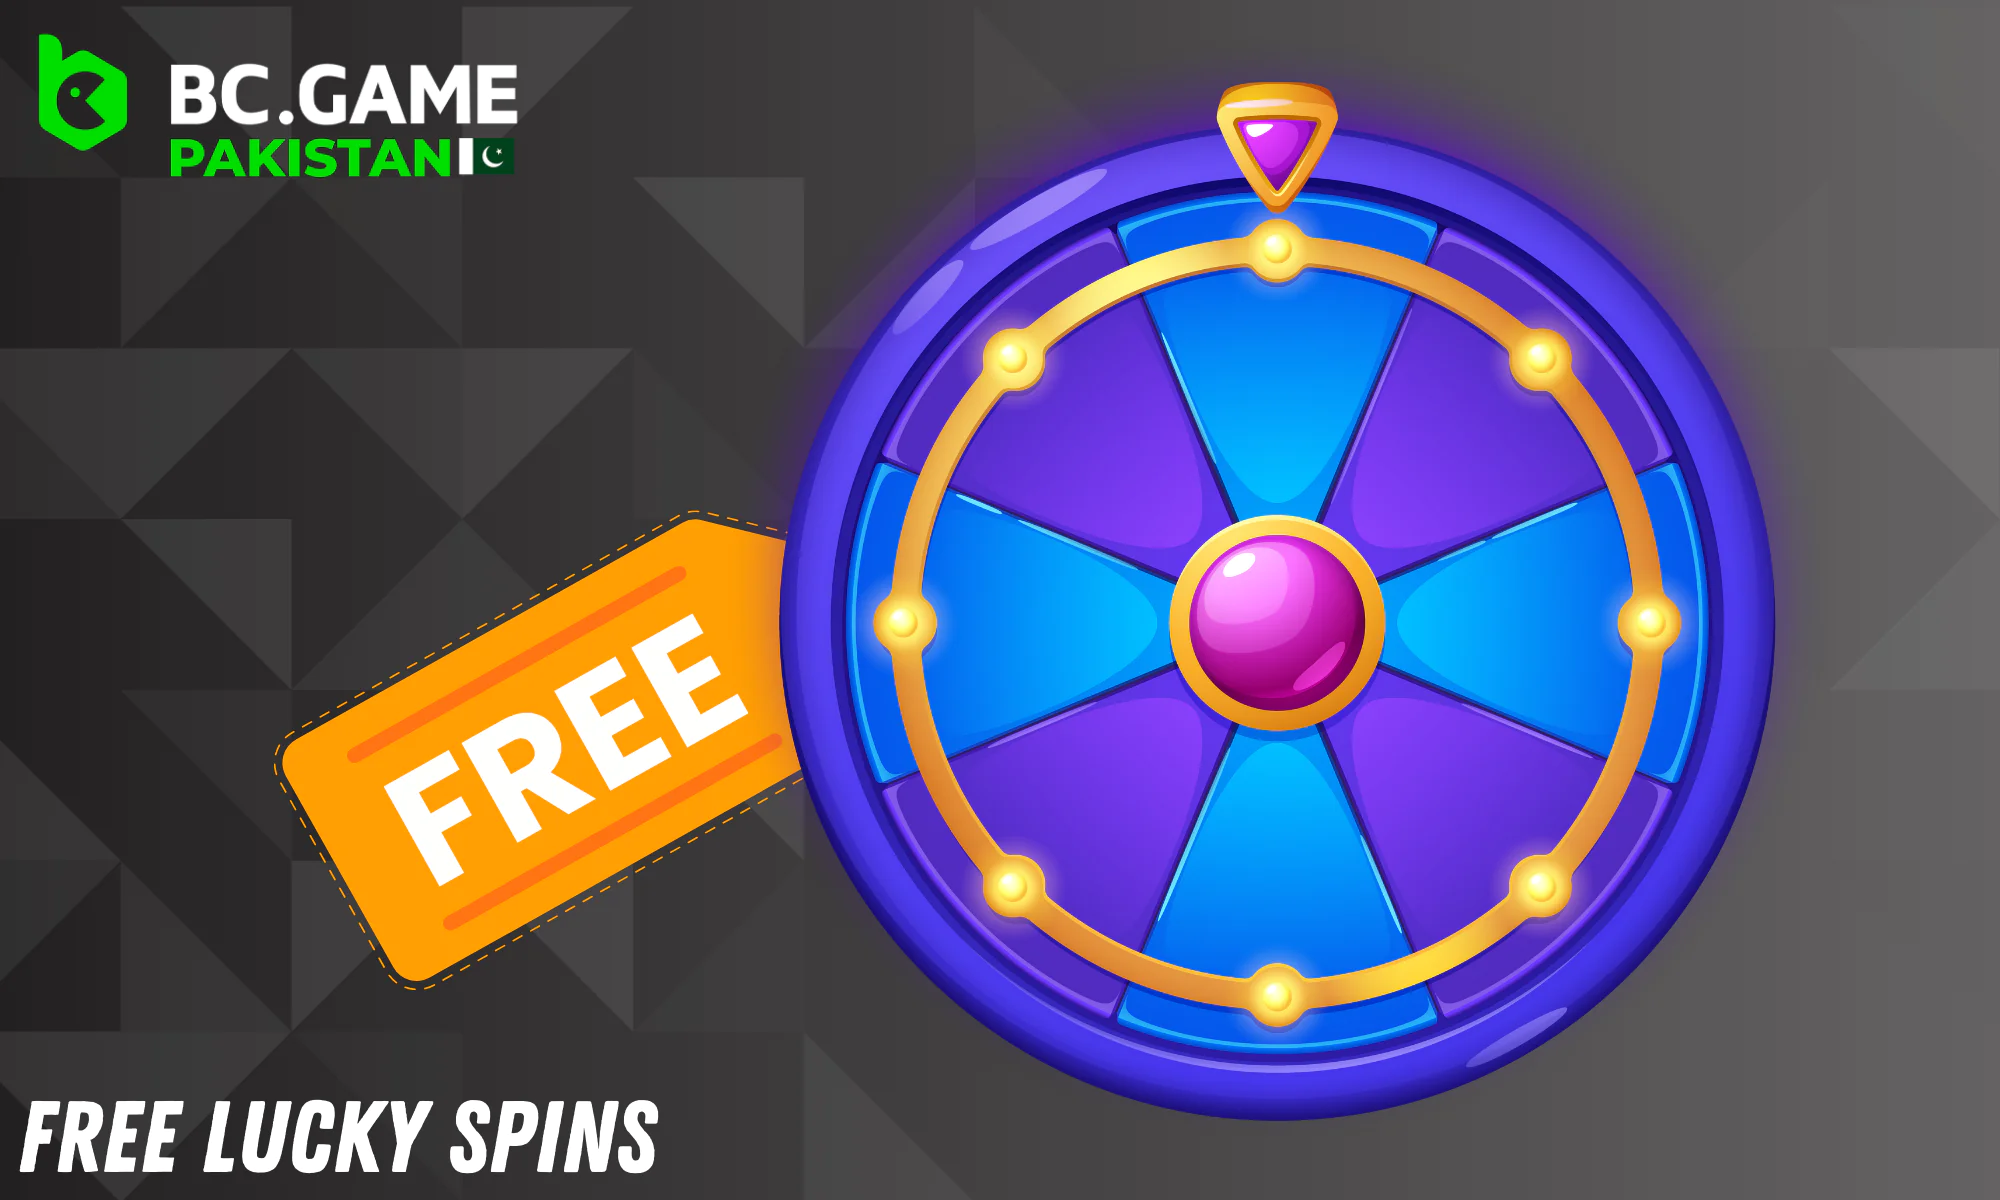 BC Game regularly runs the Lucky Spin promotion